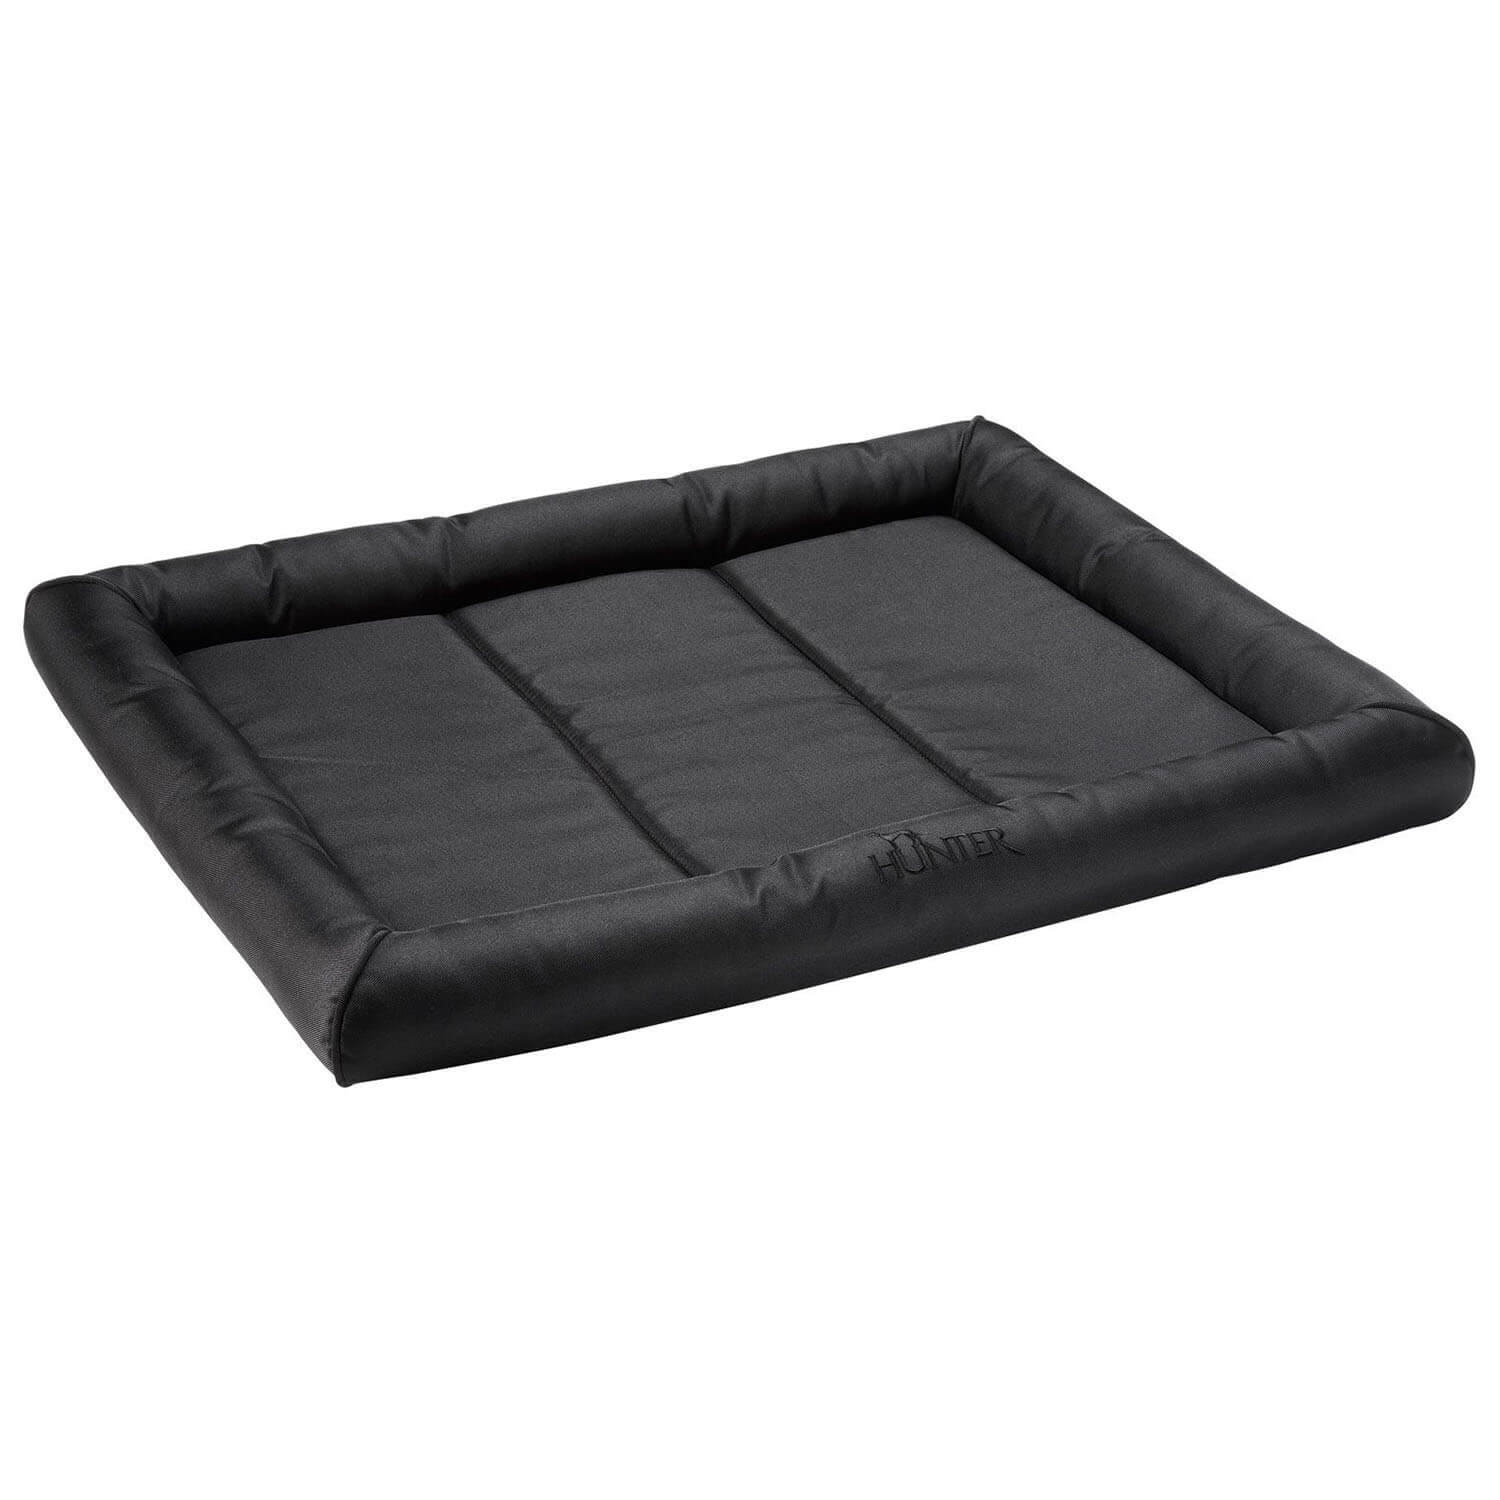 Hunter dogbed vermont (Black)